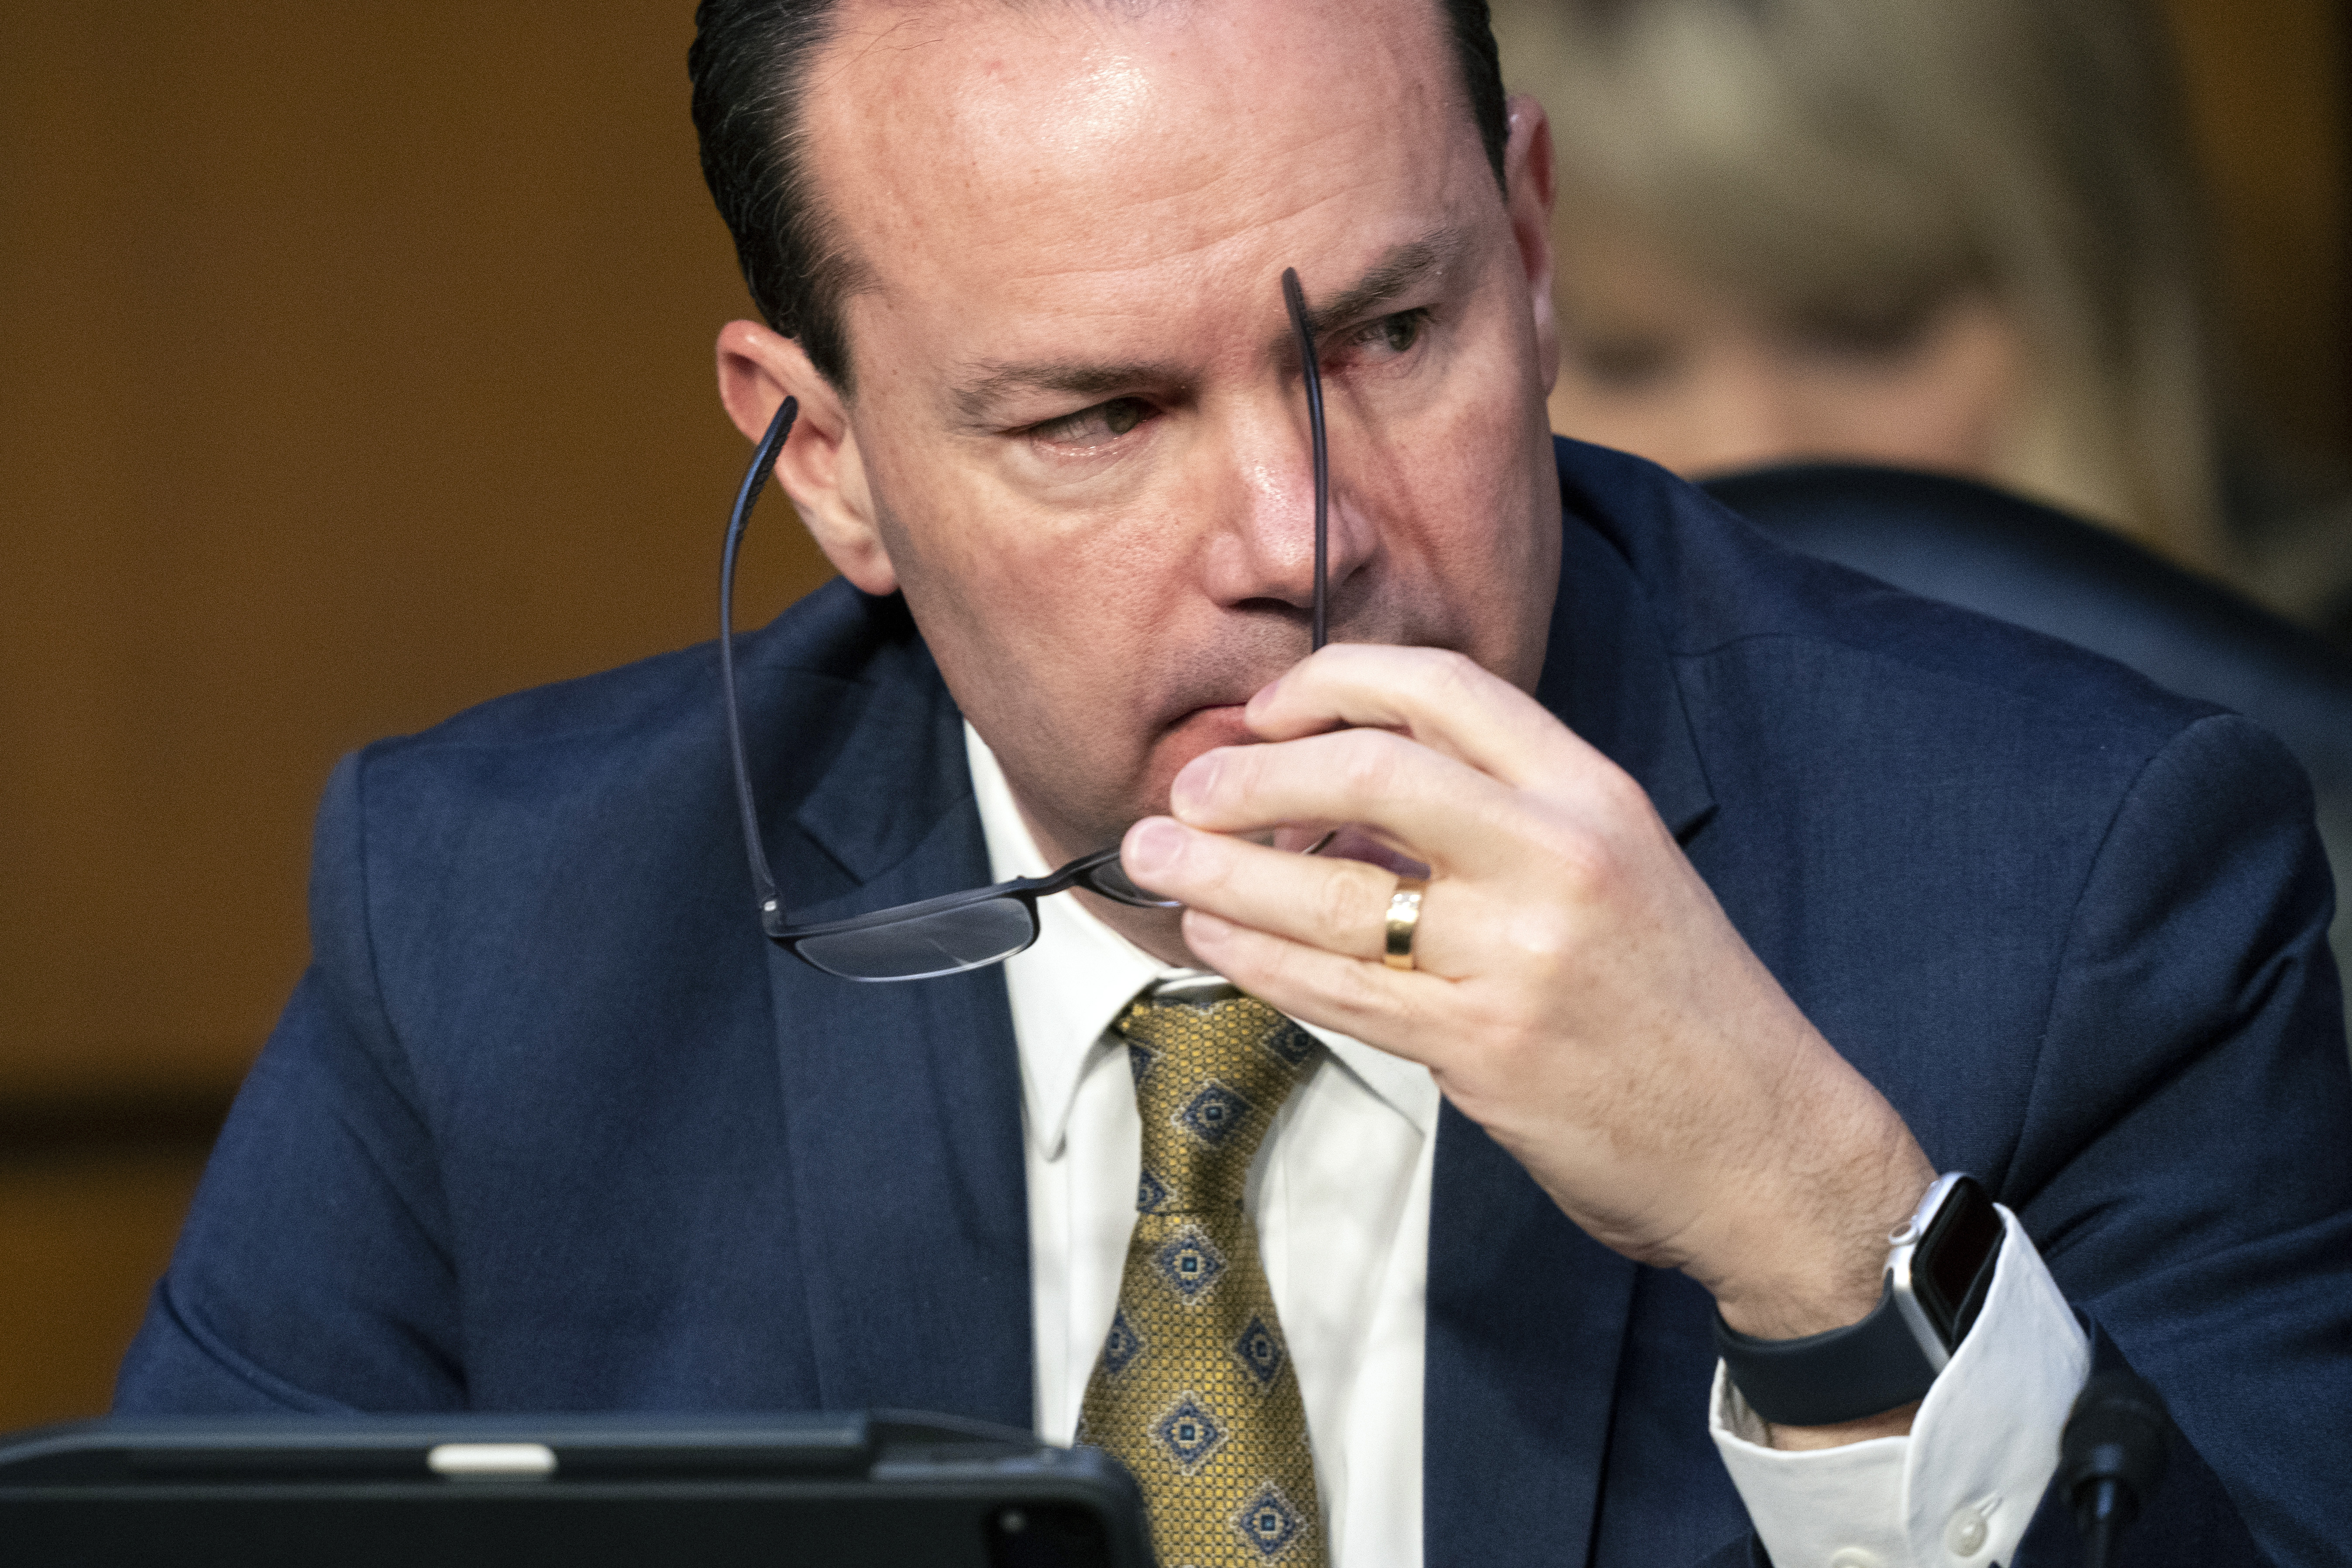 Please tell me what I should be saying.' Text messages show Sen. Mike Lee  assisting Trump efforts to overturn 2020 election